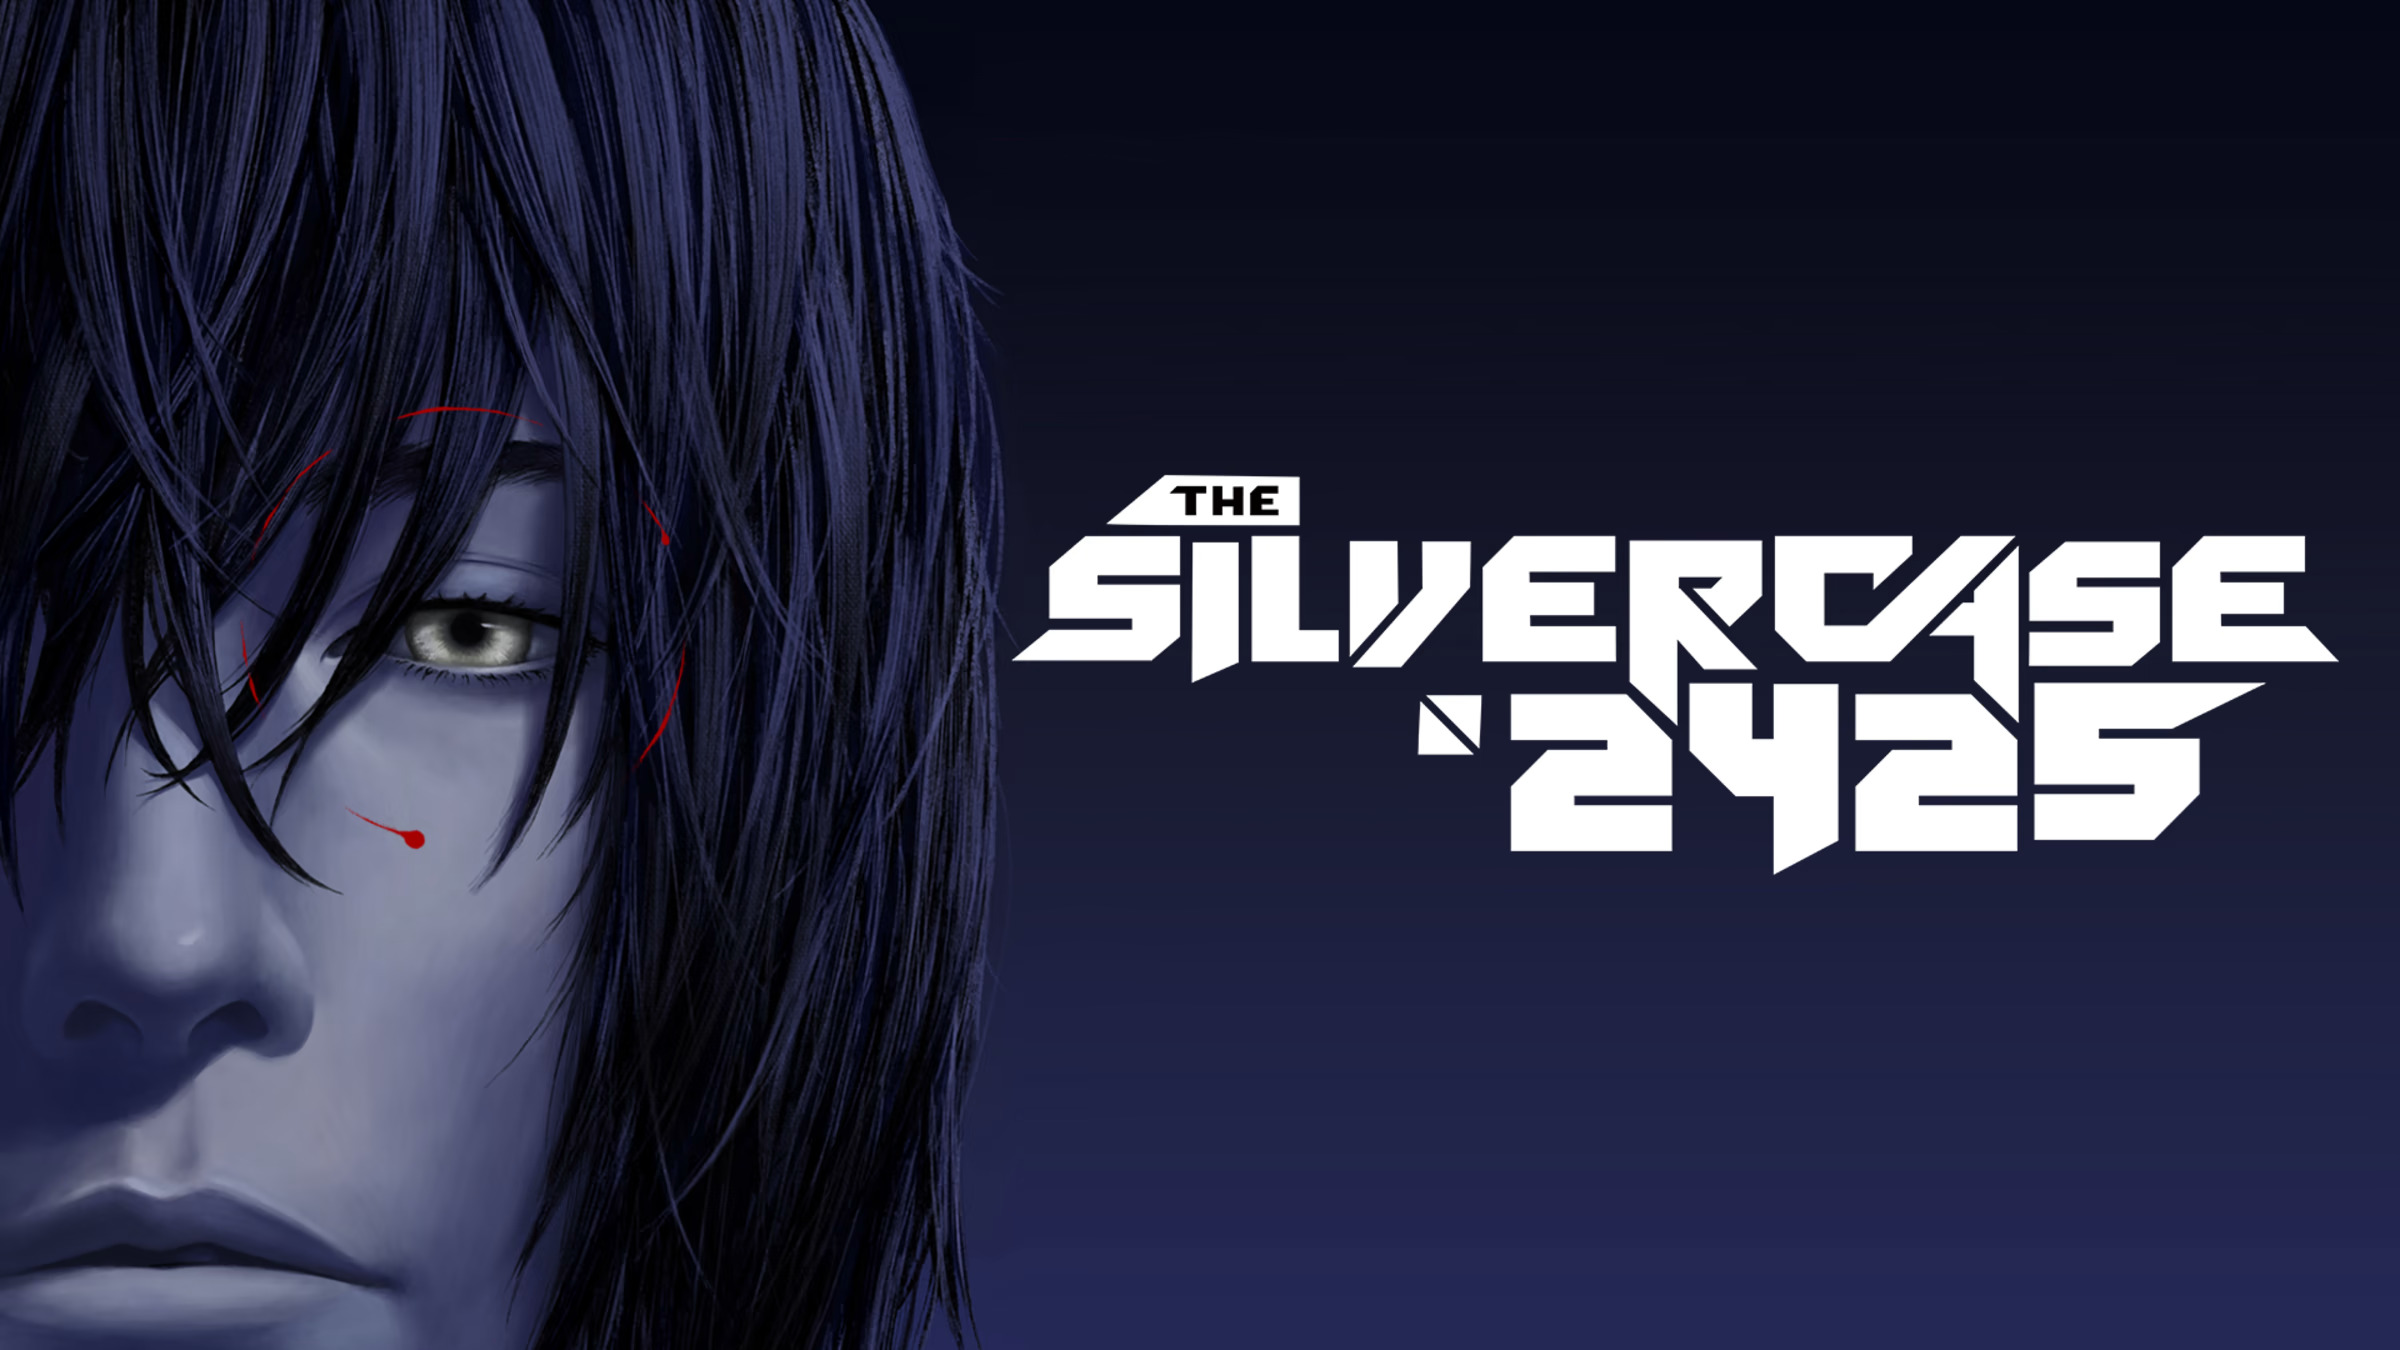 Promotional artwork of The Silver Case 2425. To the left of the logo, Fujiwara Kamui's head is visible. He has a serene expression. His left eye is visible. It is silver and outlined with several thin red lines.